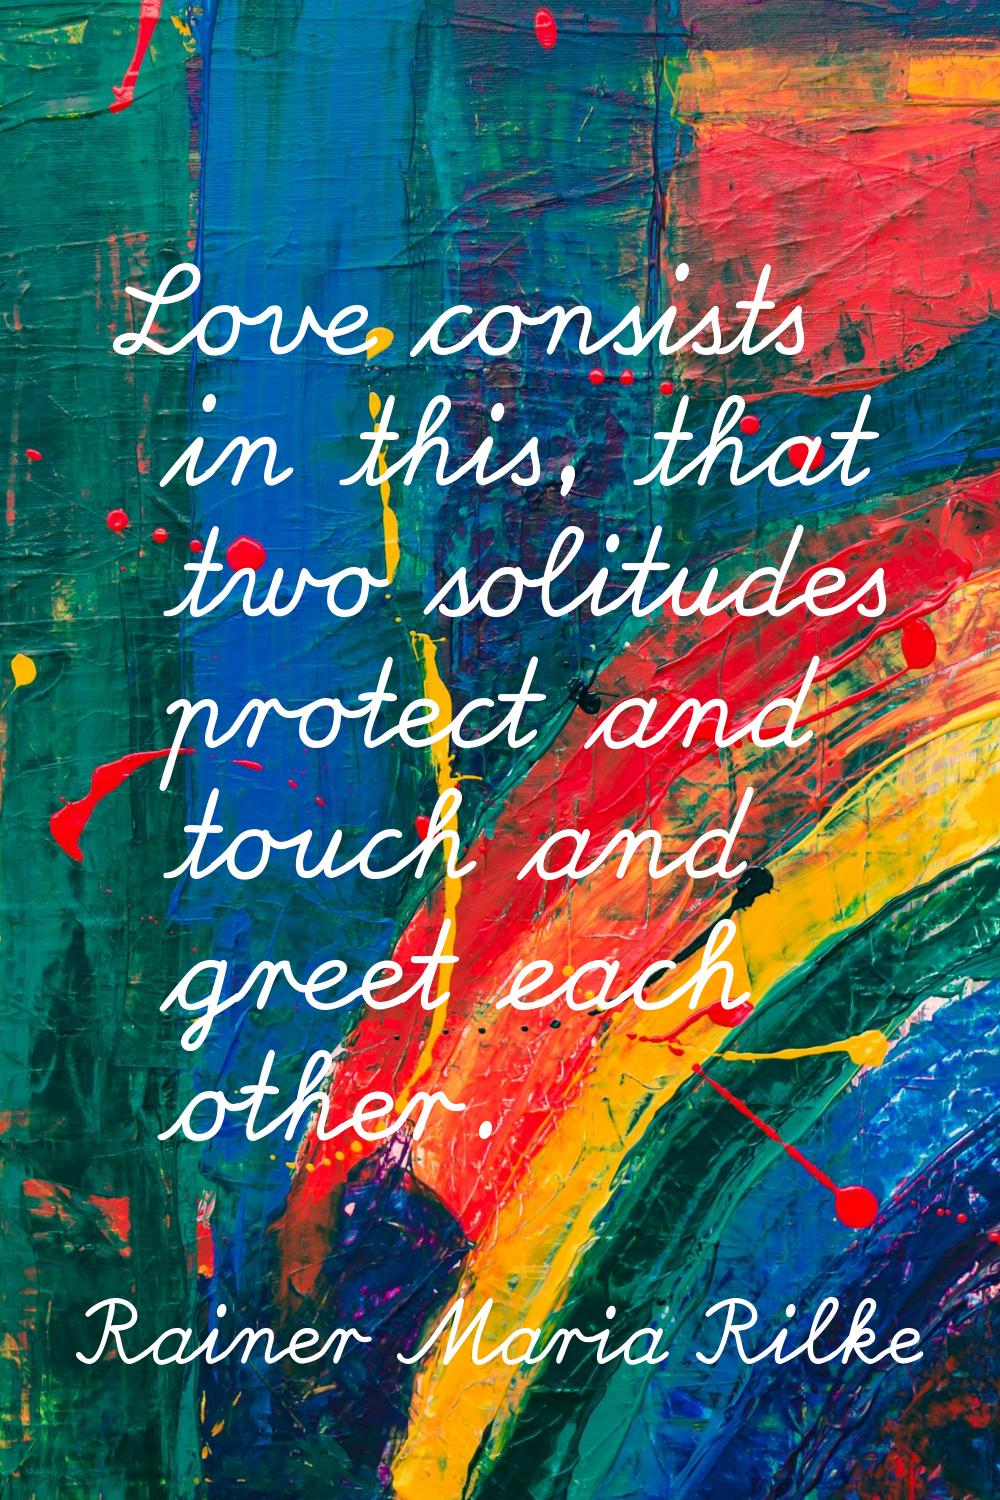 Love consists in this, that two solitudes protect and touch and greet each other.